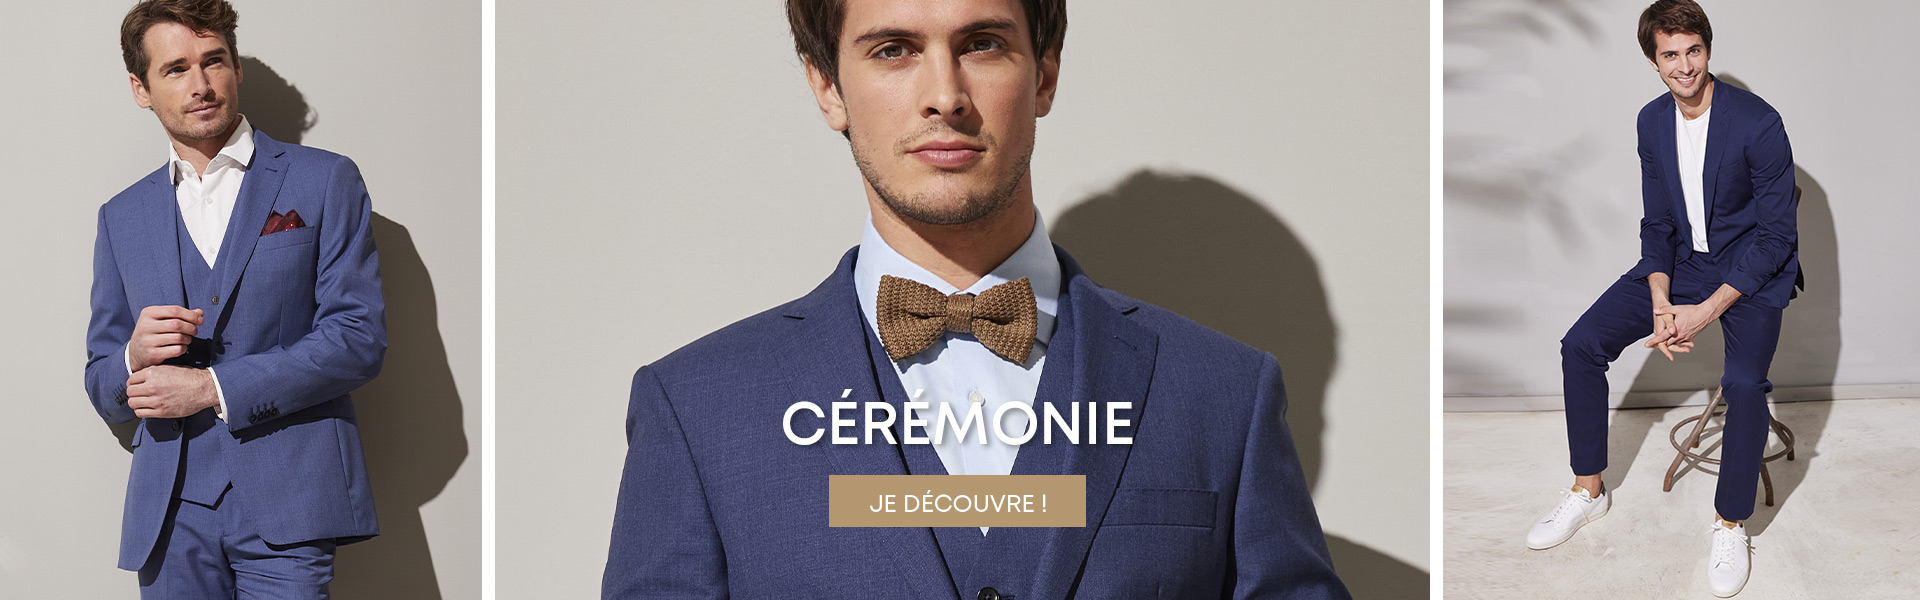 Costumes mariage homme